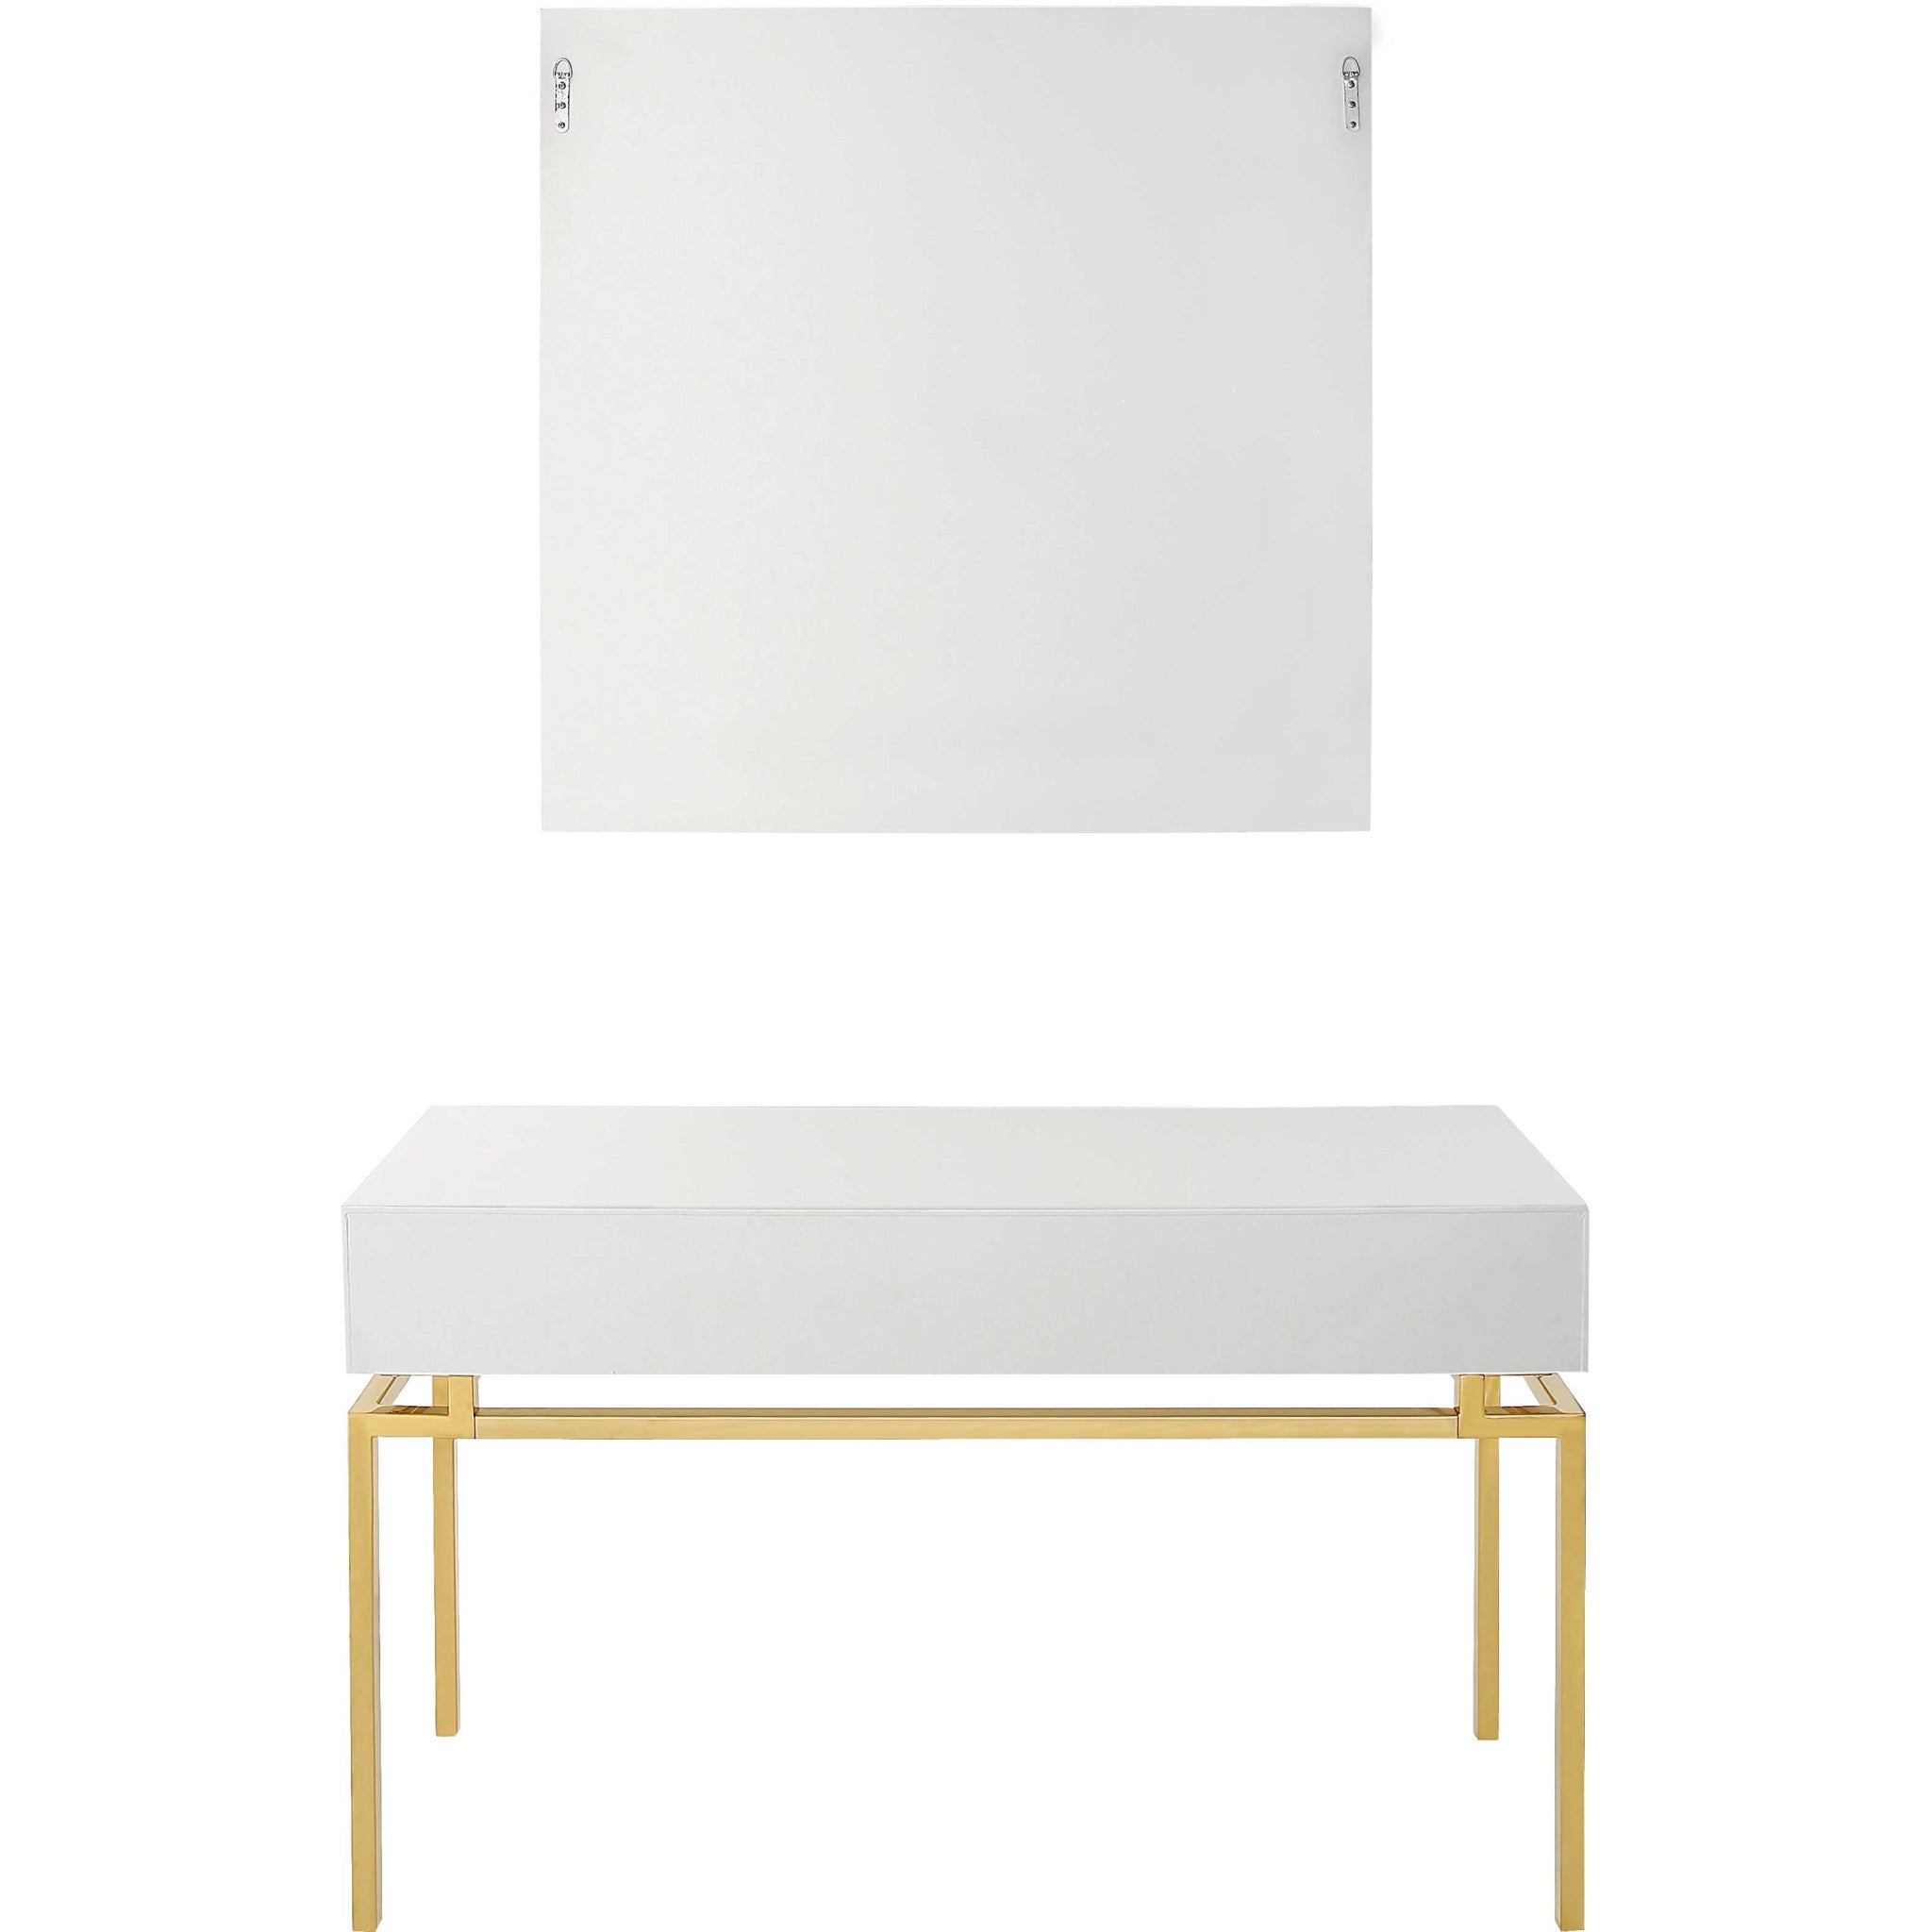 Set of Two 47" White and Gold Wood and Manufactured Wood Blend Mirrored Console Table And Drawers